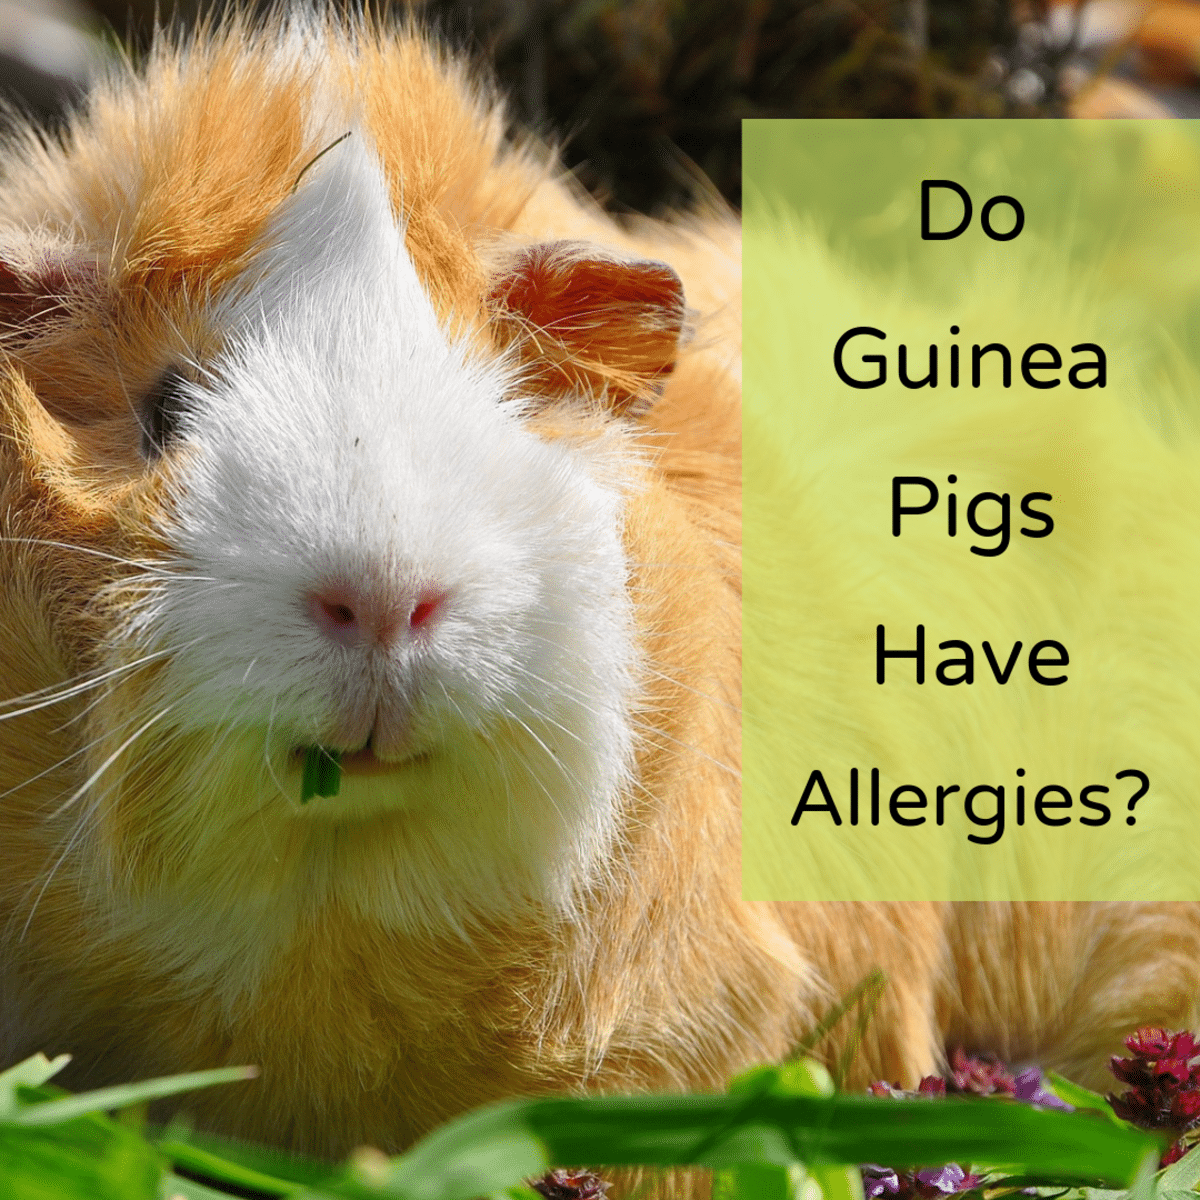 What are Guinea Pigs Allergic To?